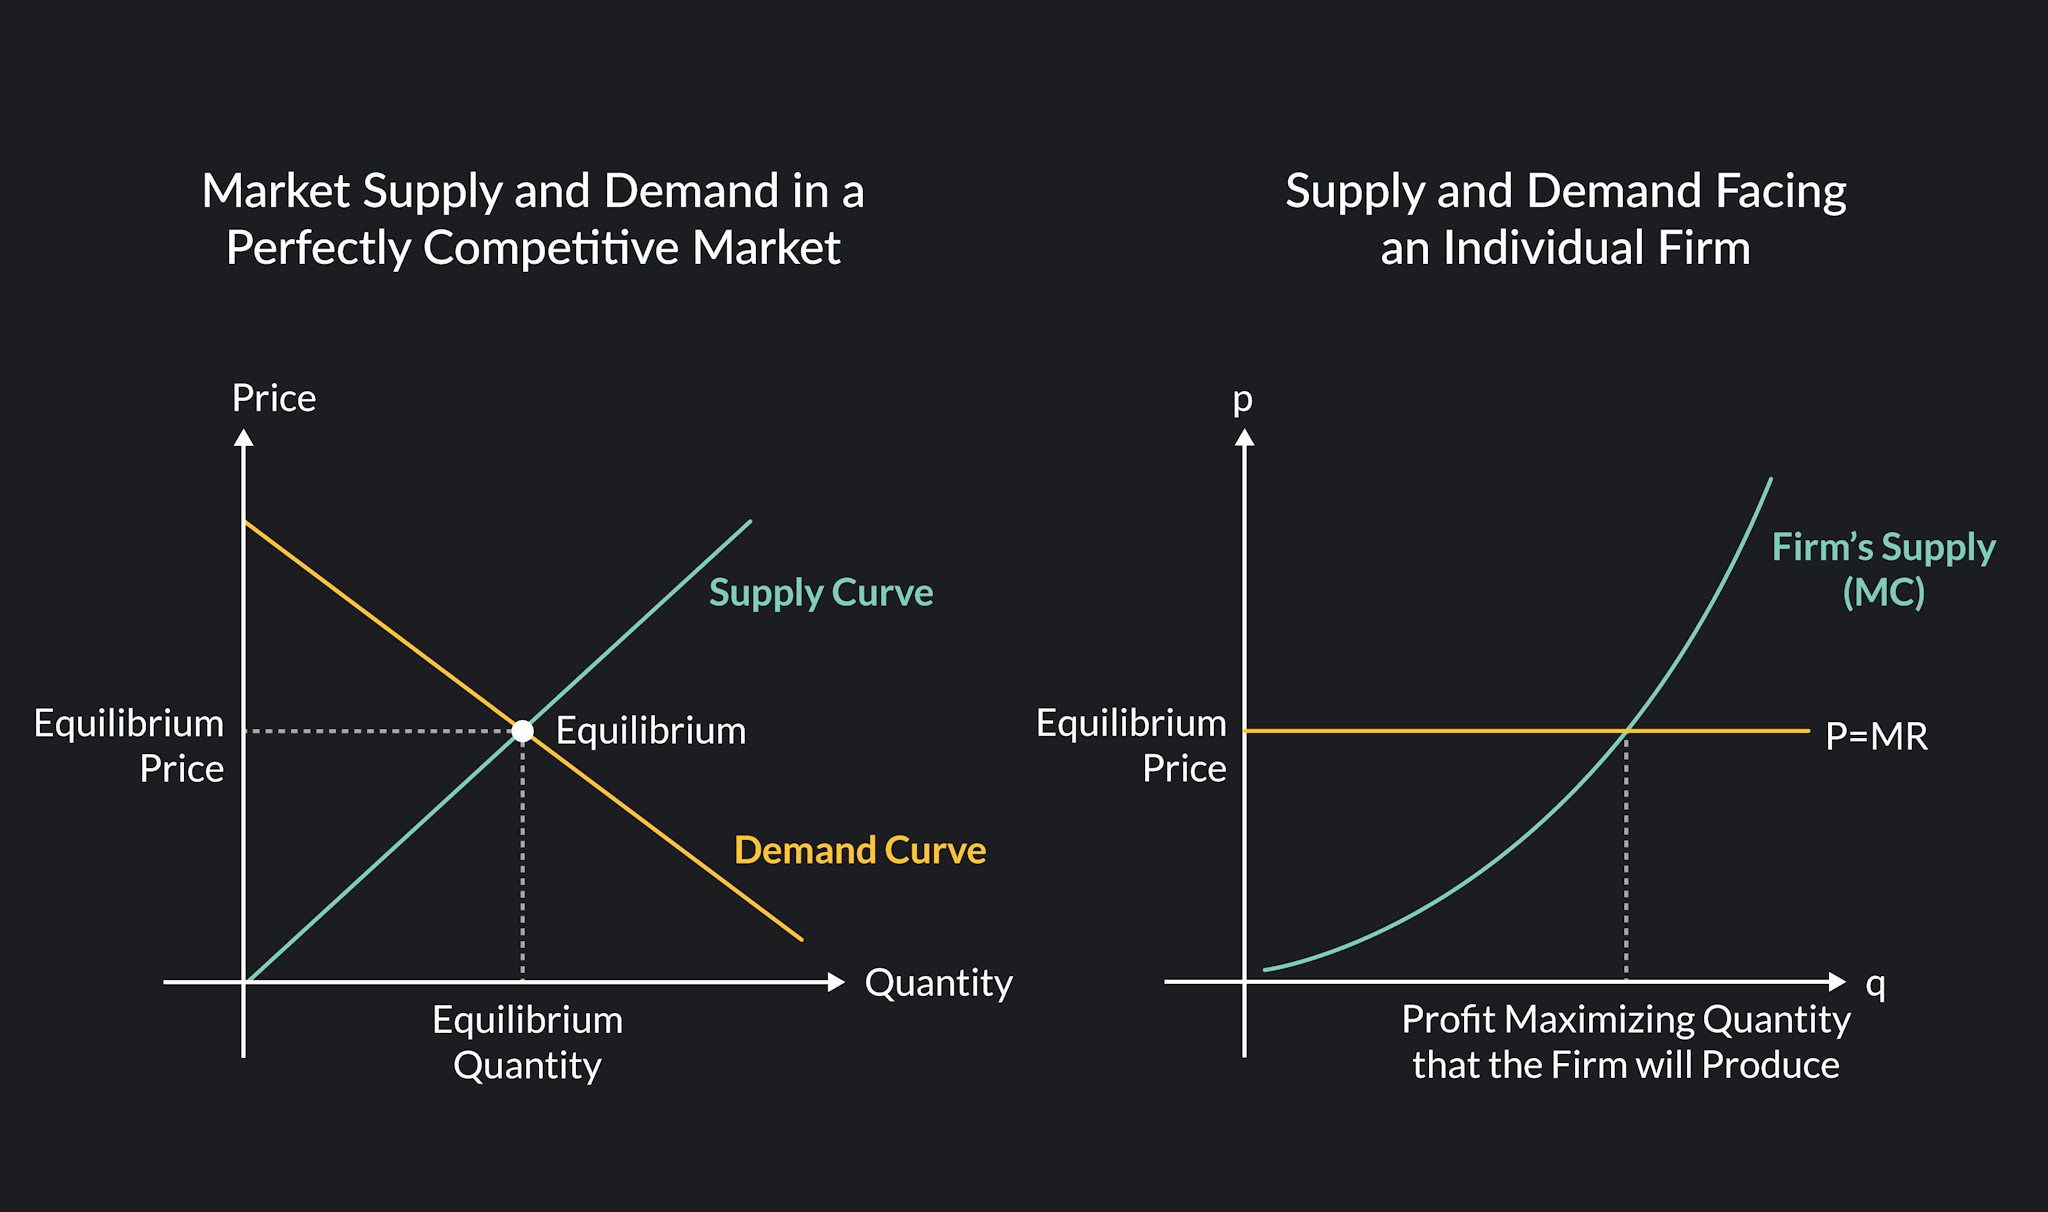 case study of perfectly competitive market